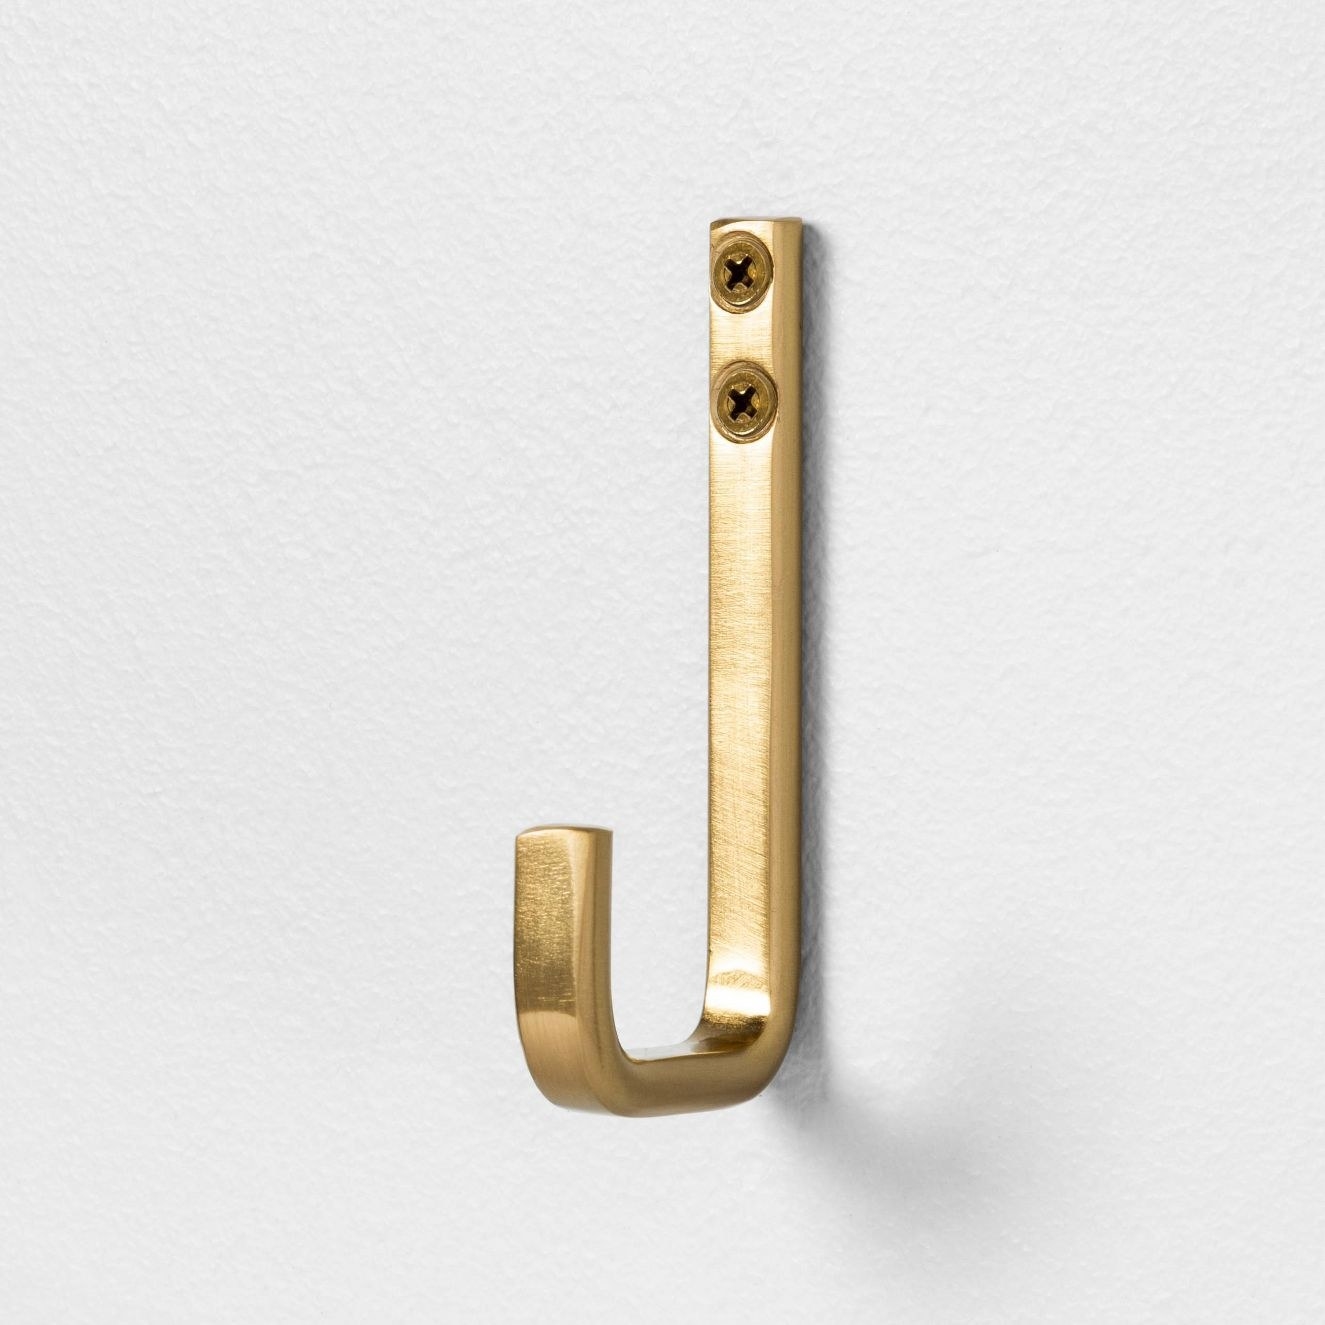 the gold metal wall hook